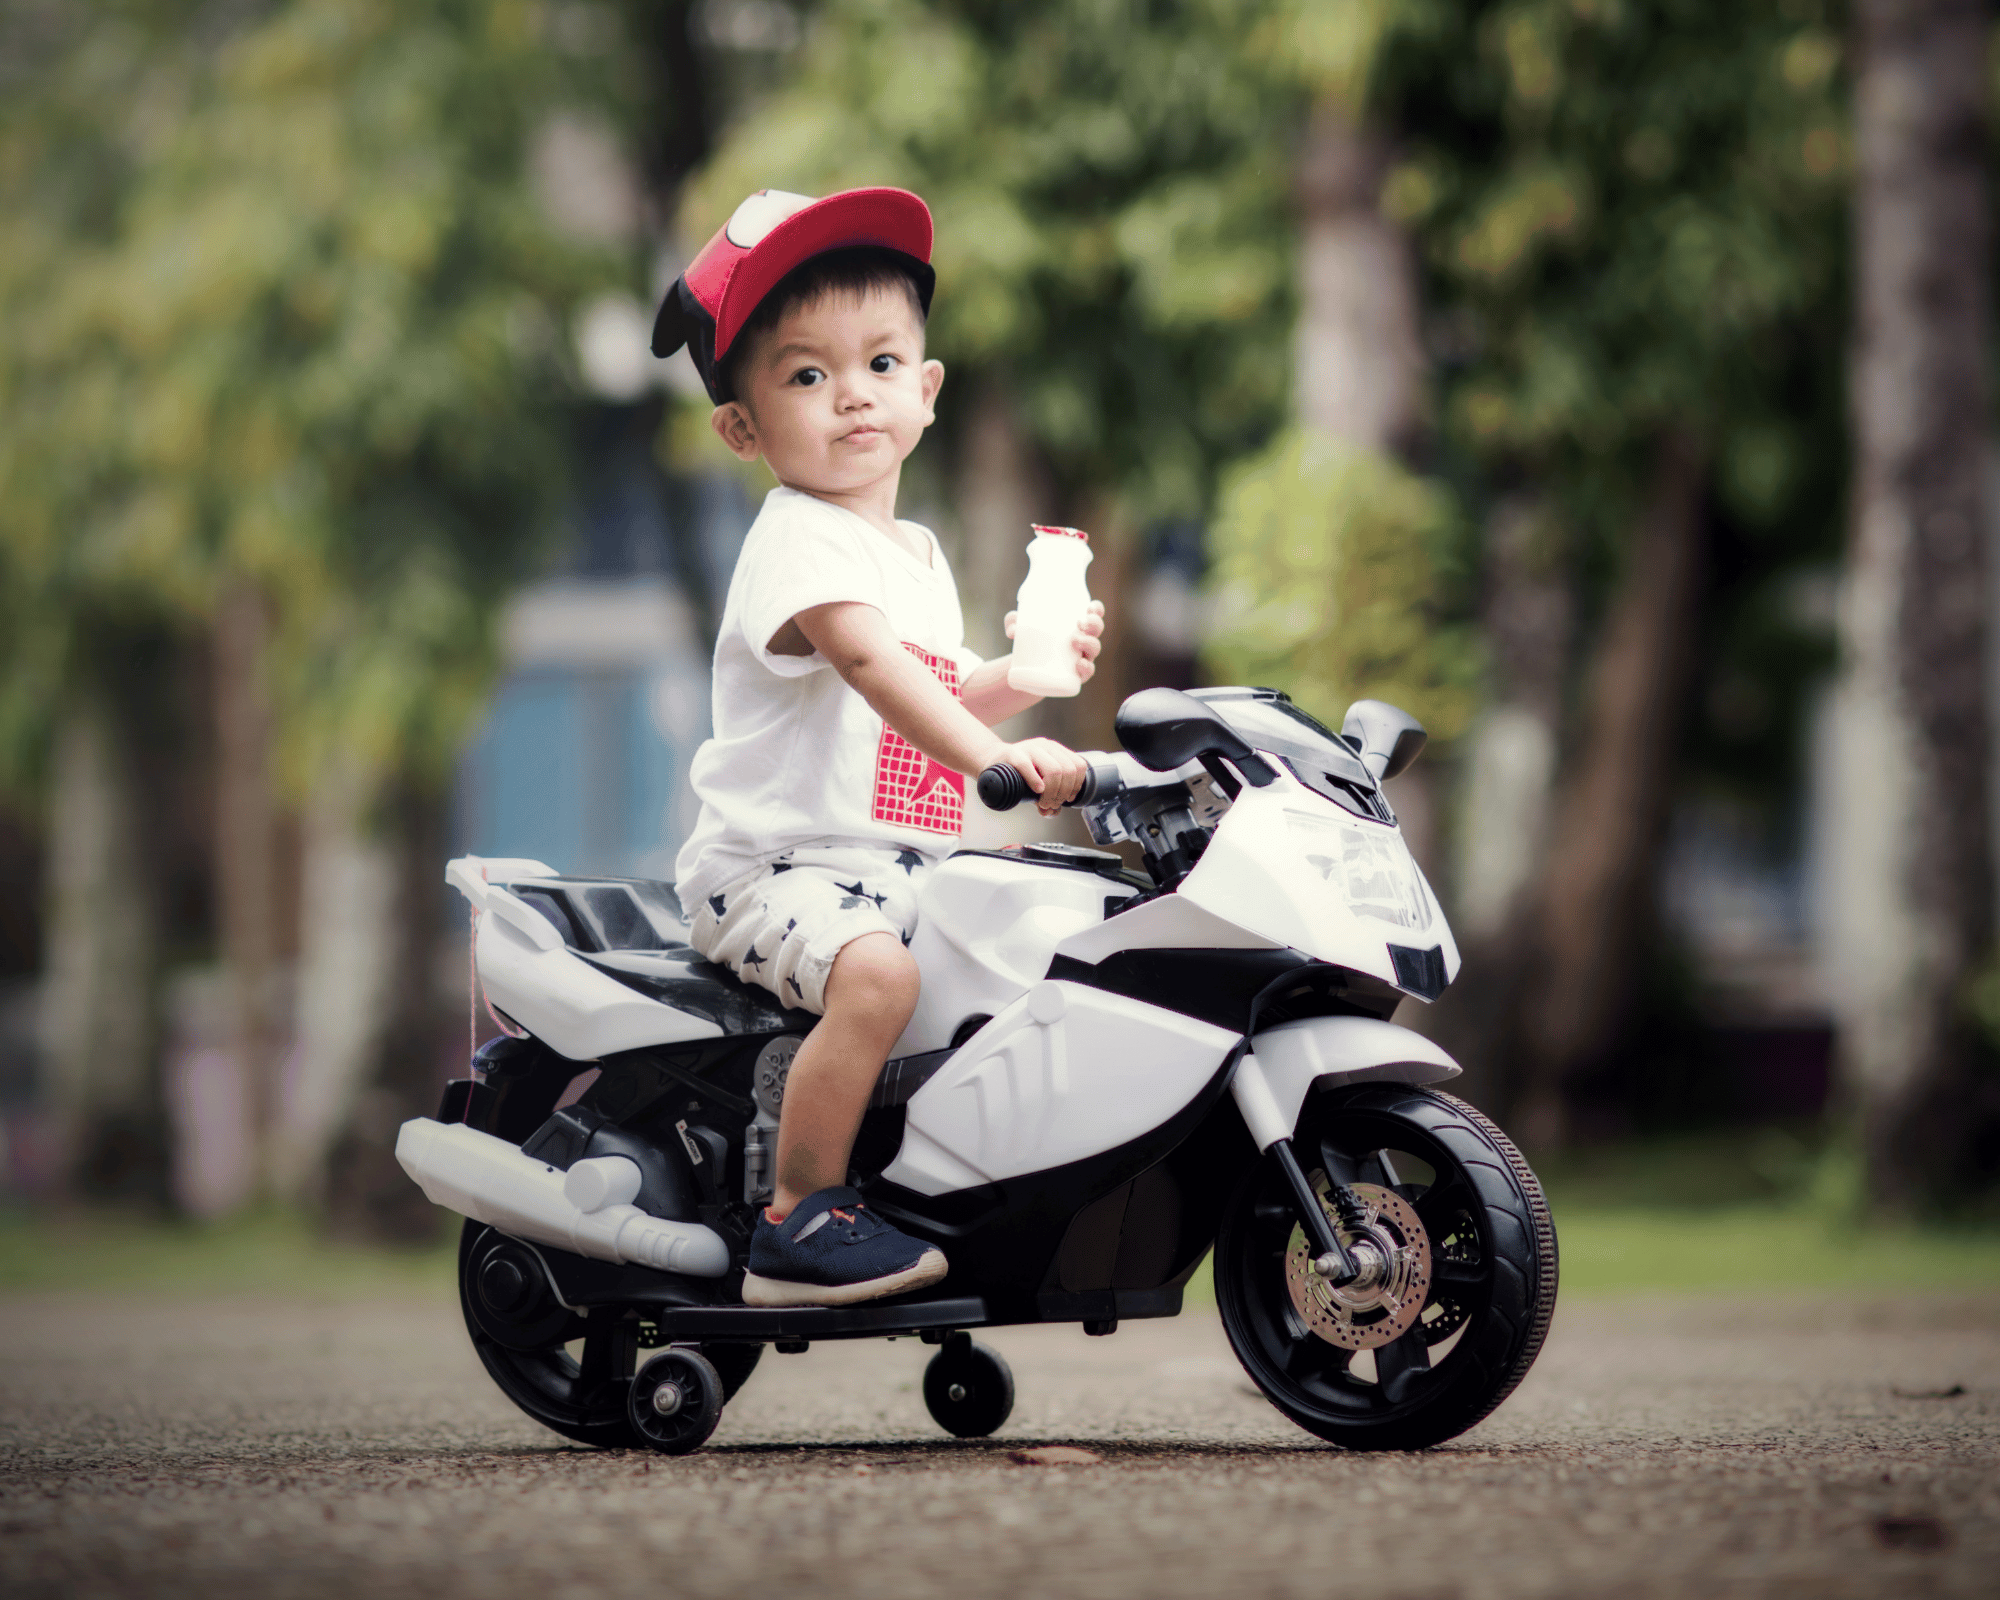 Motorcycle Safety: 5 Must-Follow Rules When Riding with Kids